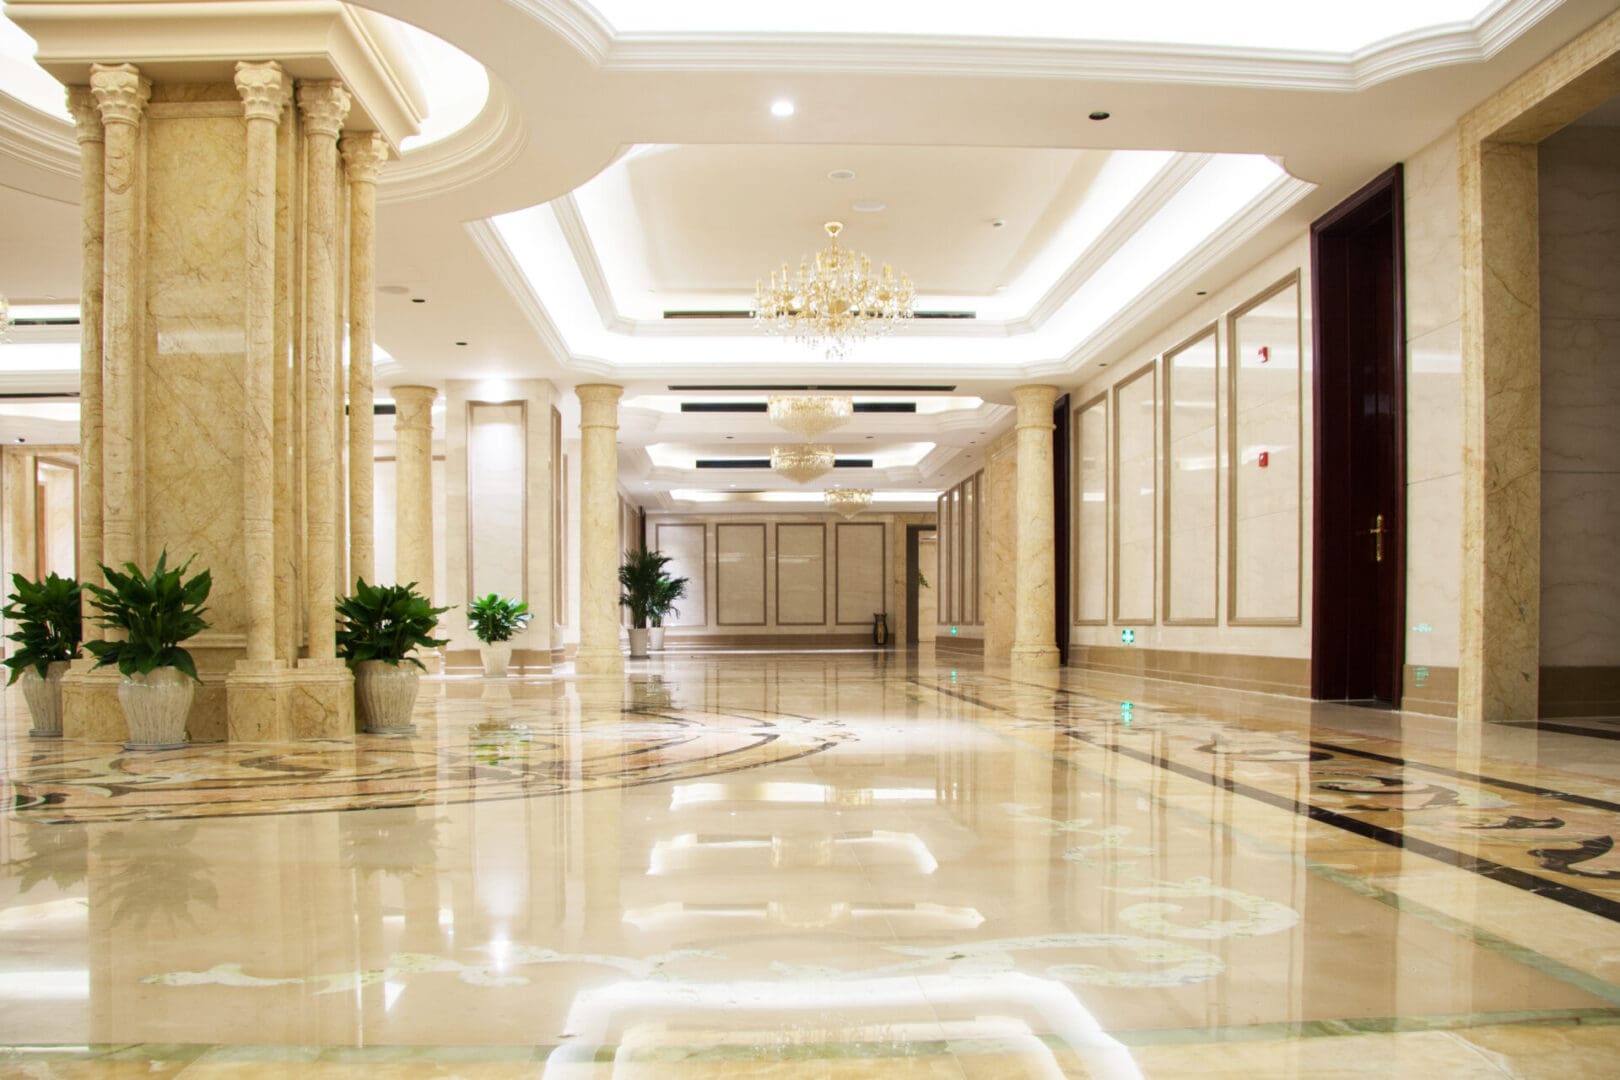 A large hallway with pillars and lights in it